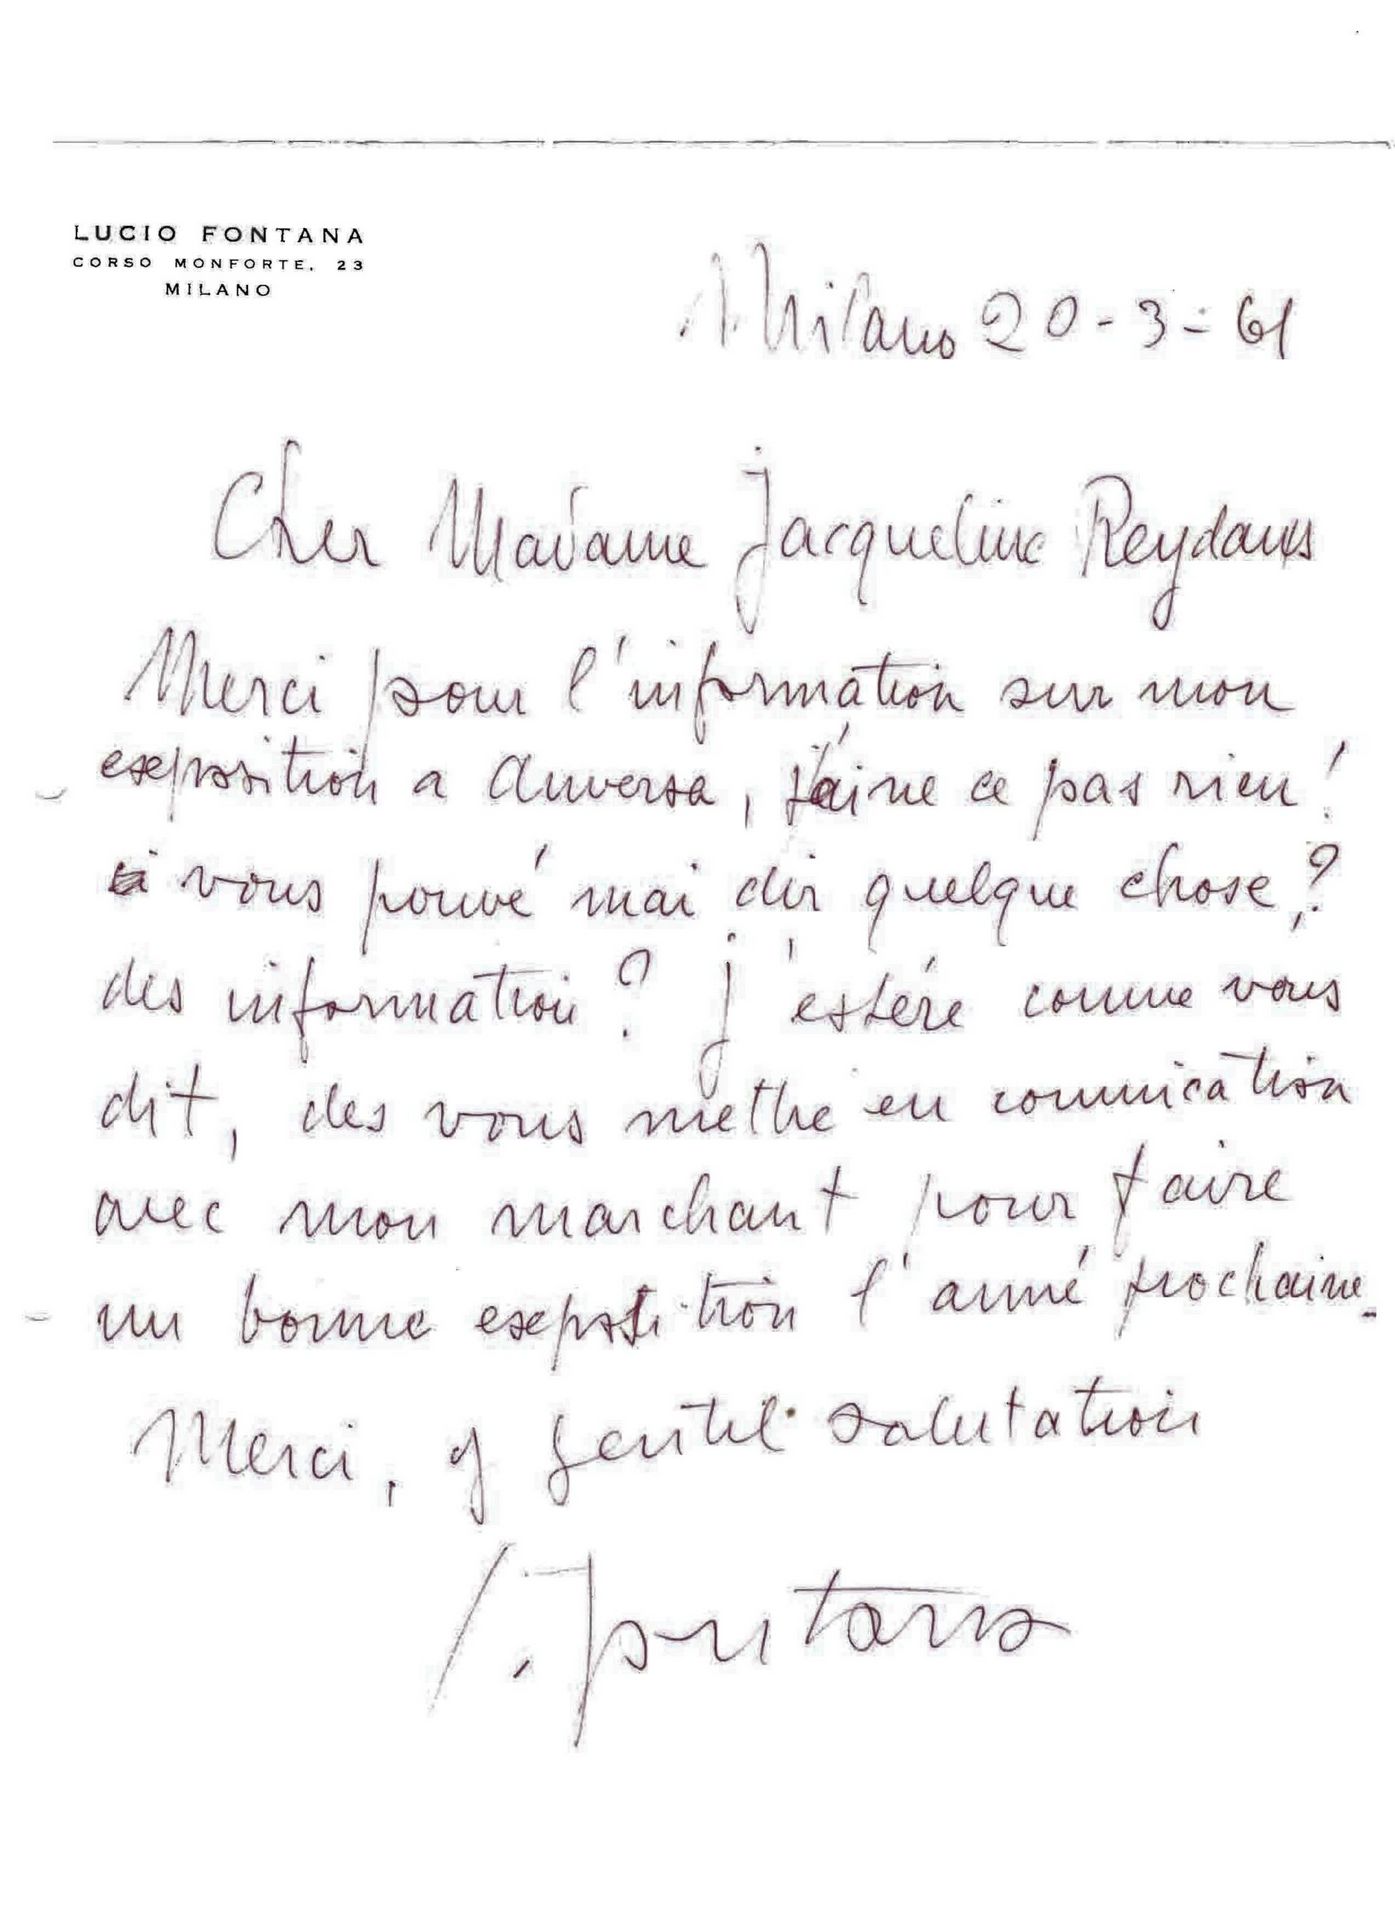 Lucio Fontana asks for more information on his upcoming exposition. Remark, that he had already some manager and a heading on his letters…(20-3-61)